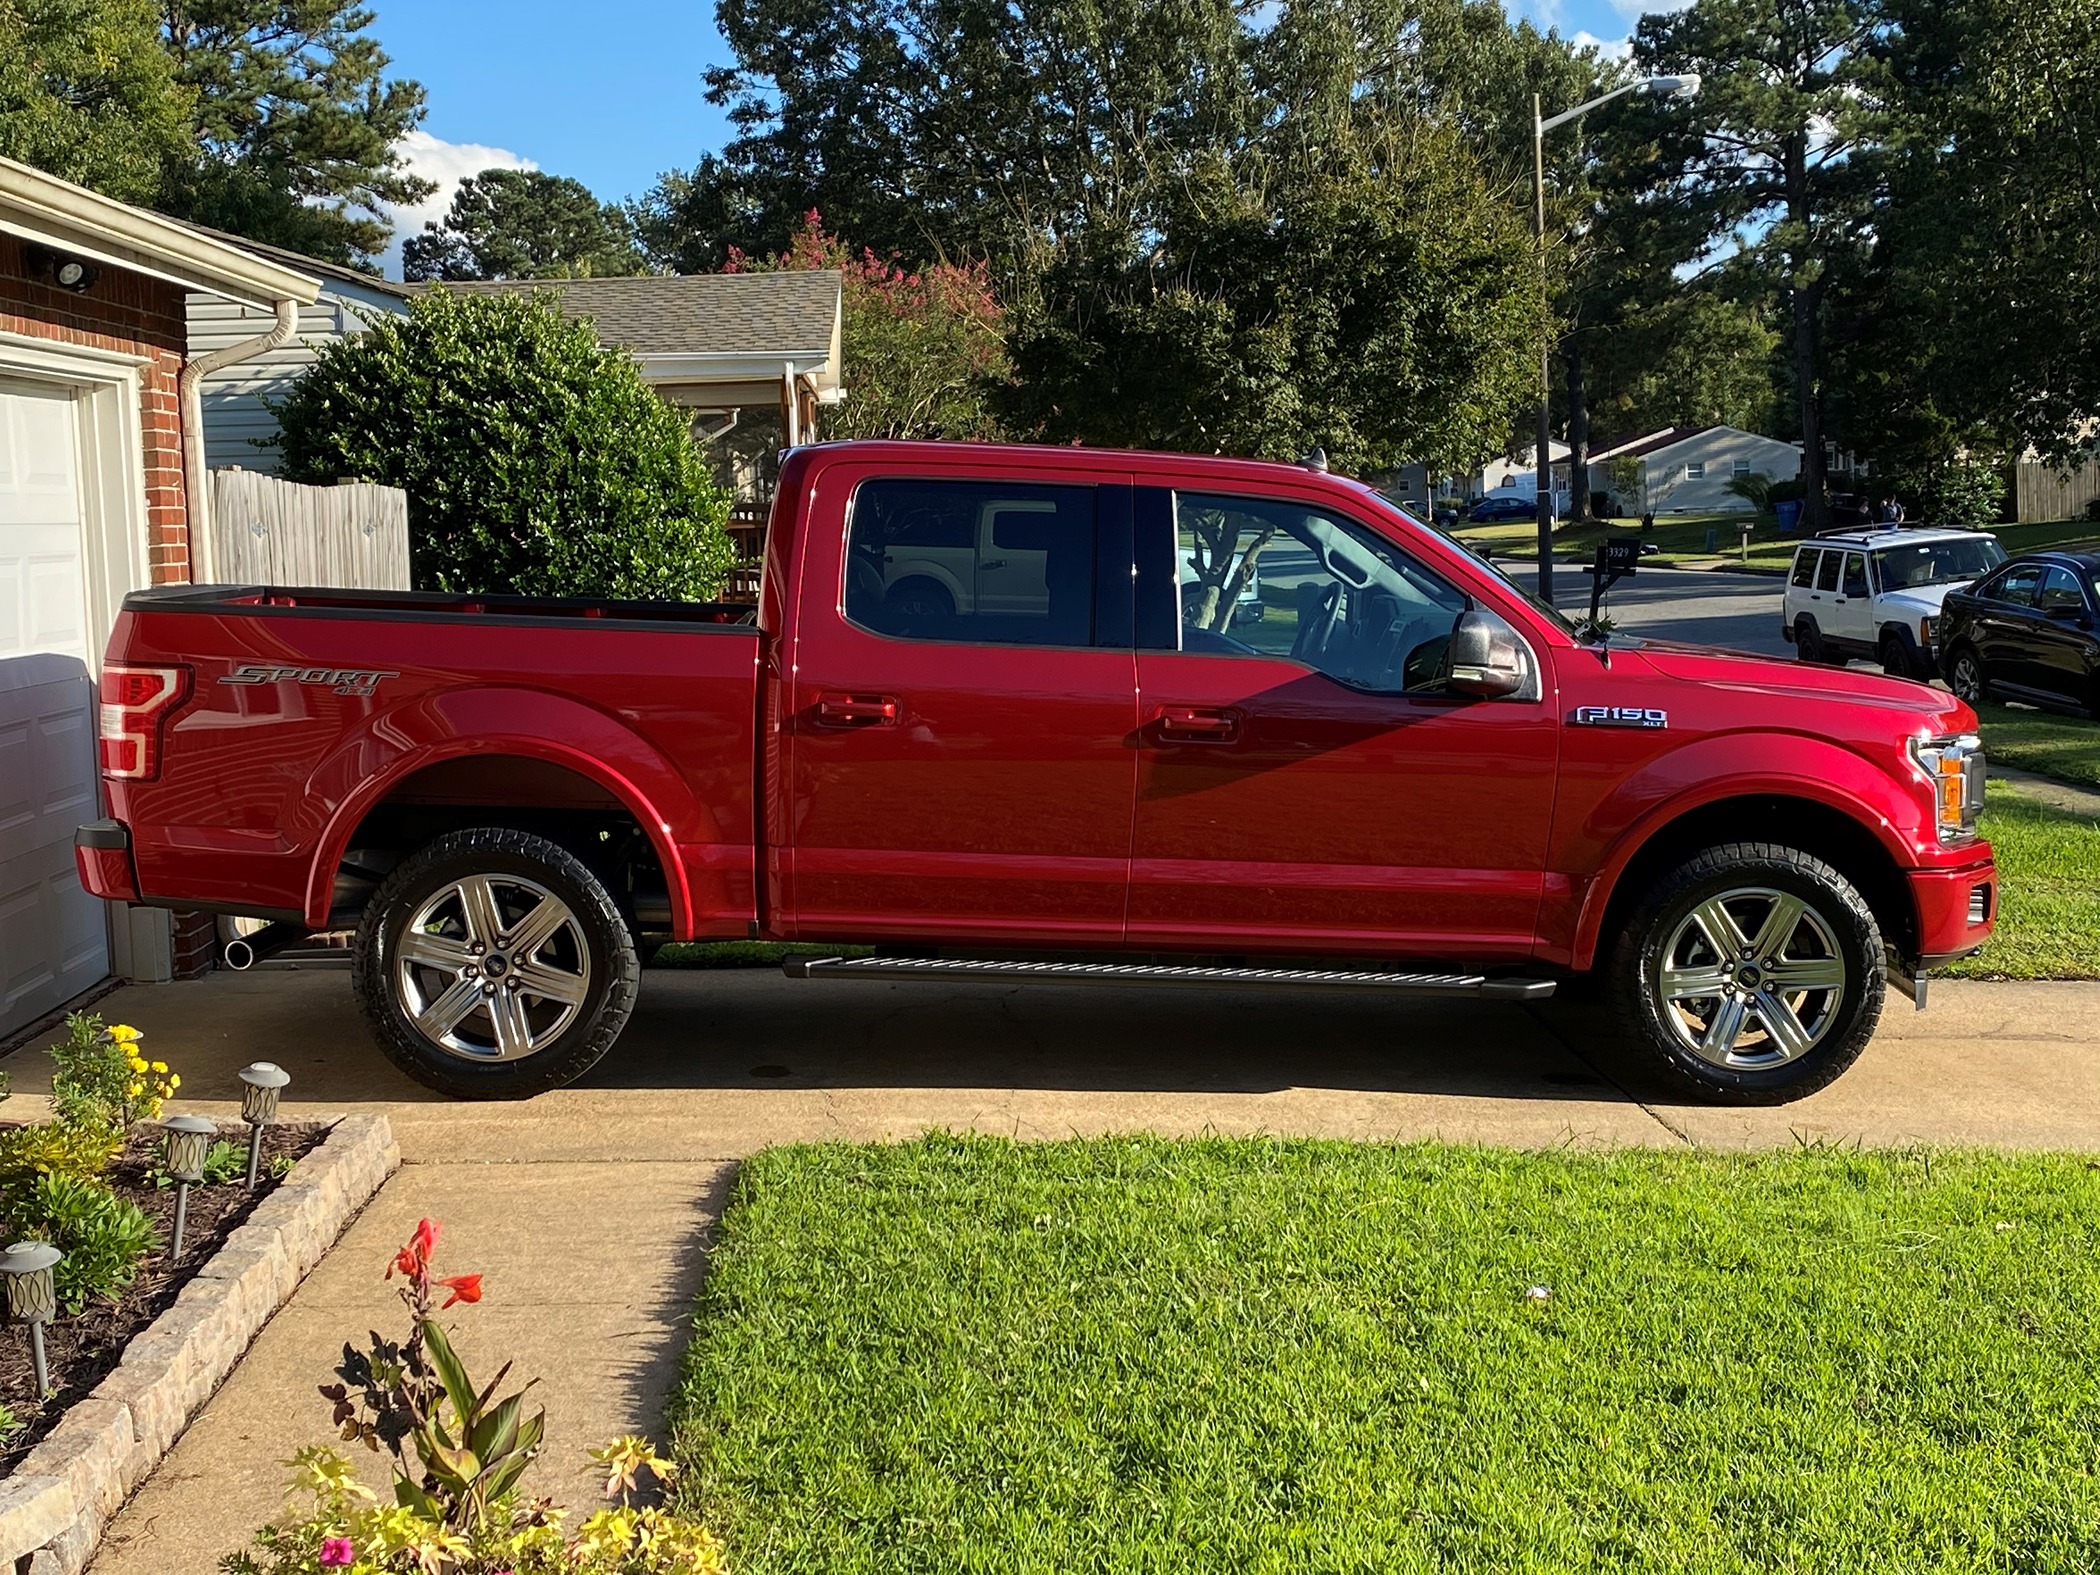 Ford F-150 Random F-150 Photos of the Day - Post Yours! 📸 🤳 2020 F150